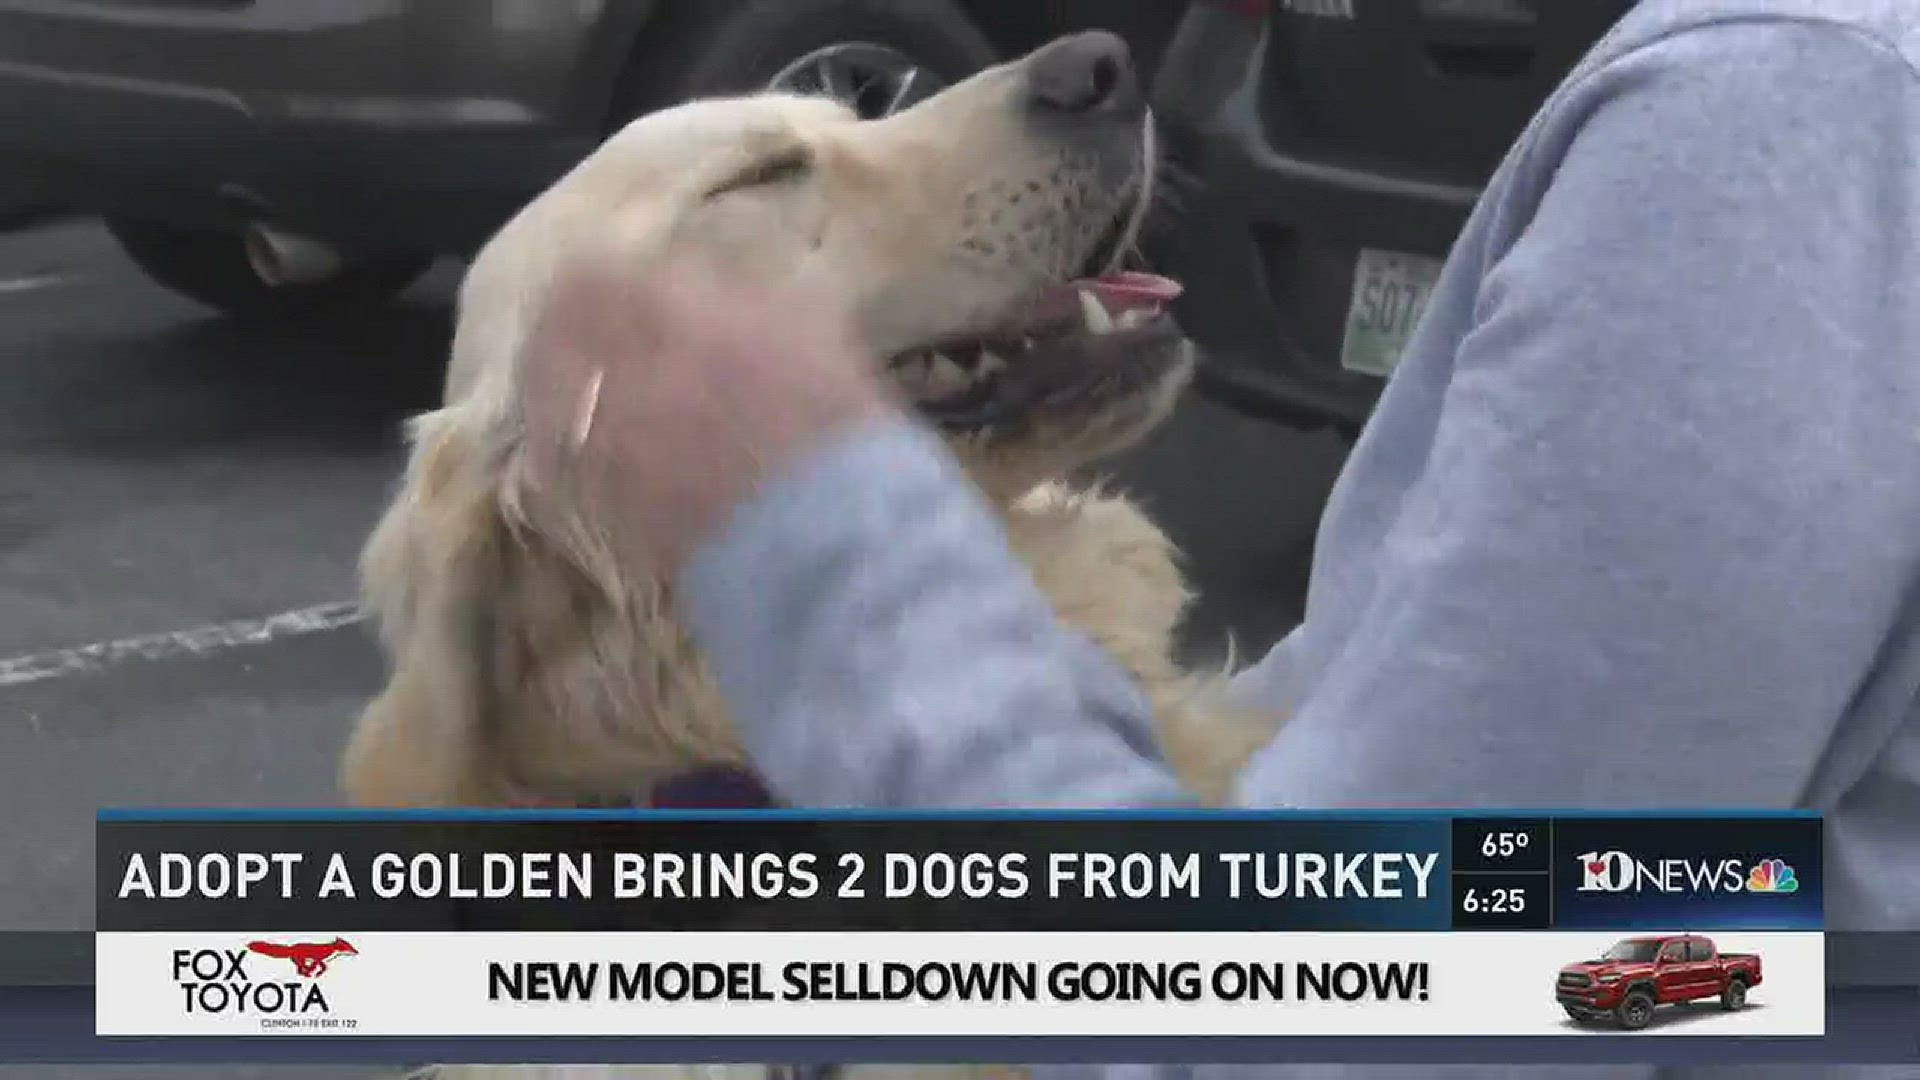 March 6, 2017: Adopt a Golden has rescued two more golden retrievers from Turkey to find their forever homes in the Knoxville area.